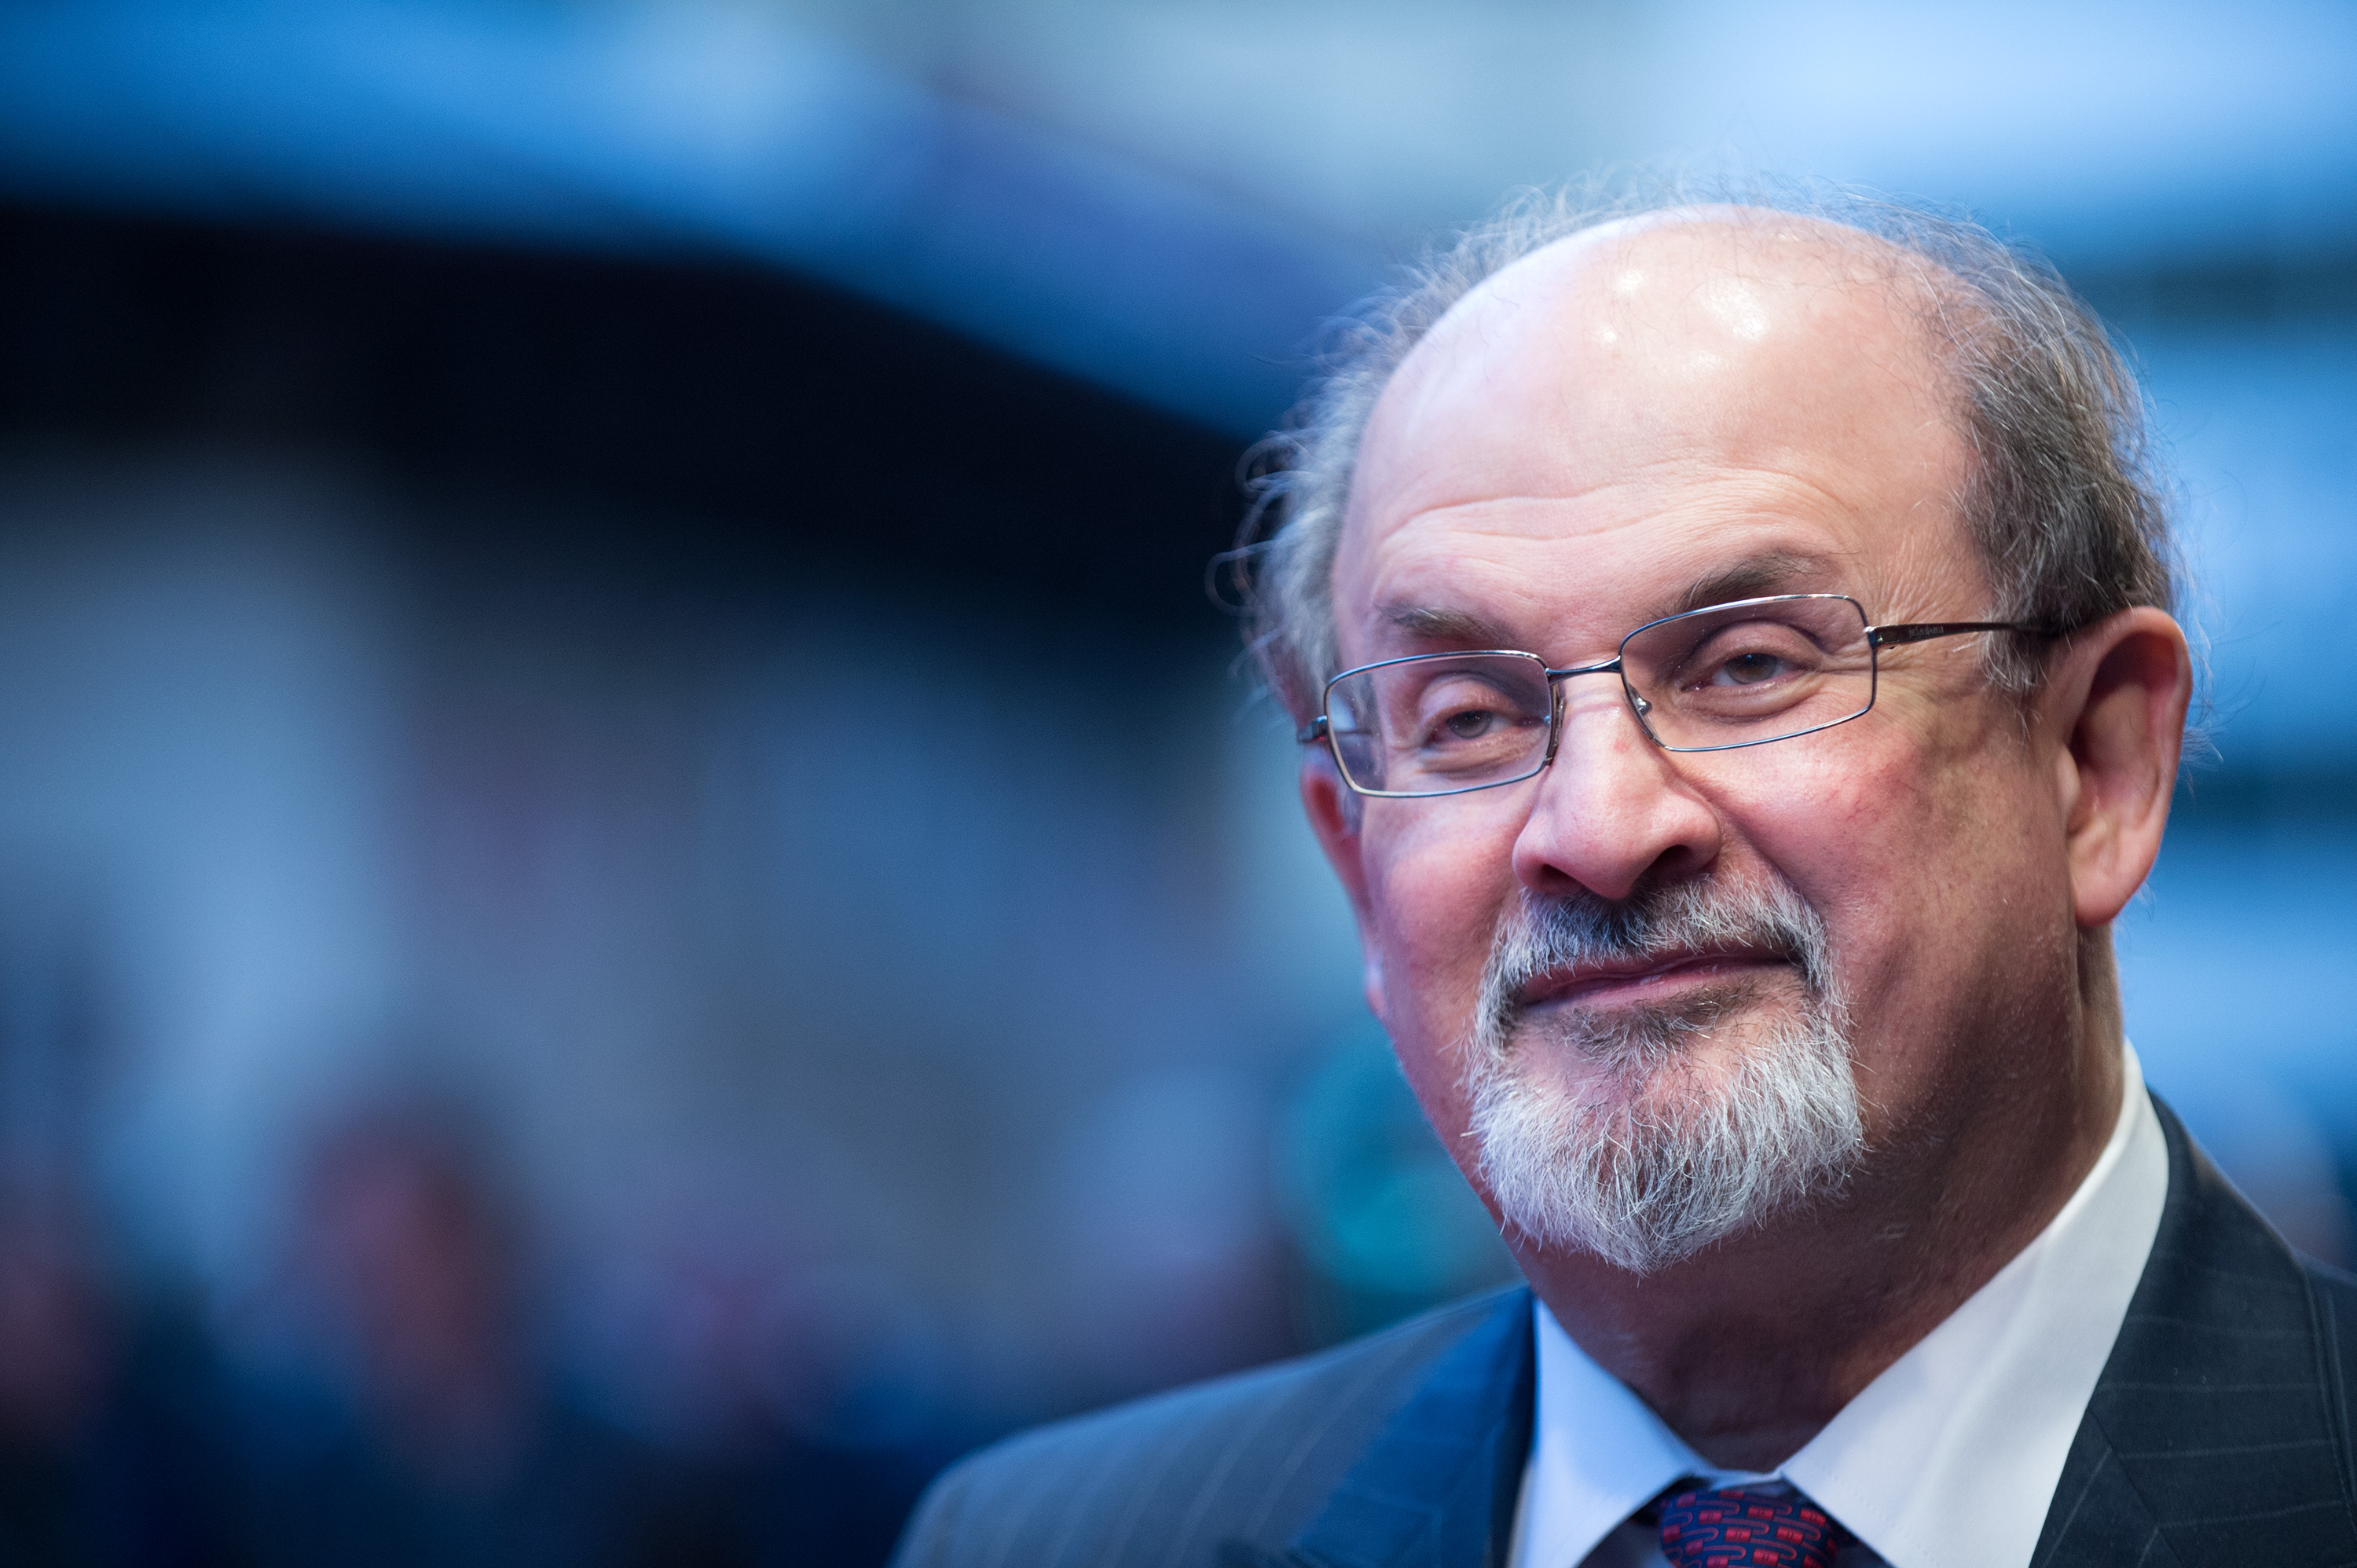 Salman Rushdie attends the premiere of 'Midnight's Children' during the 56th BFI London Film Festival at Odeon West End on Oct. 14, 2012 in London, England.